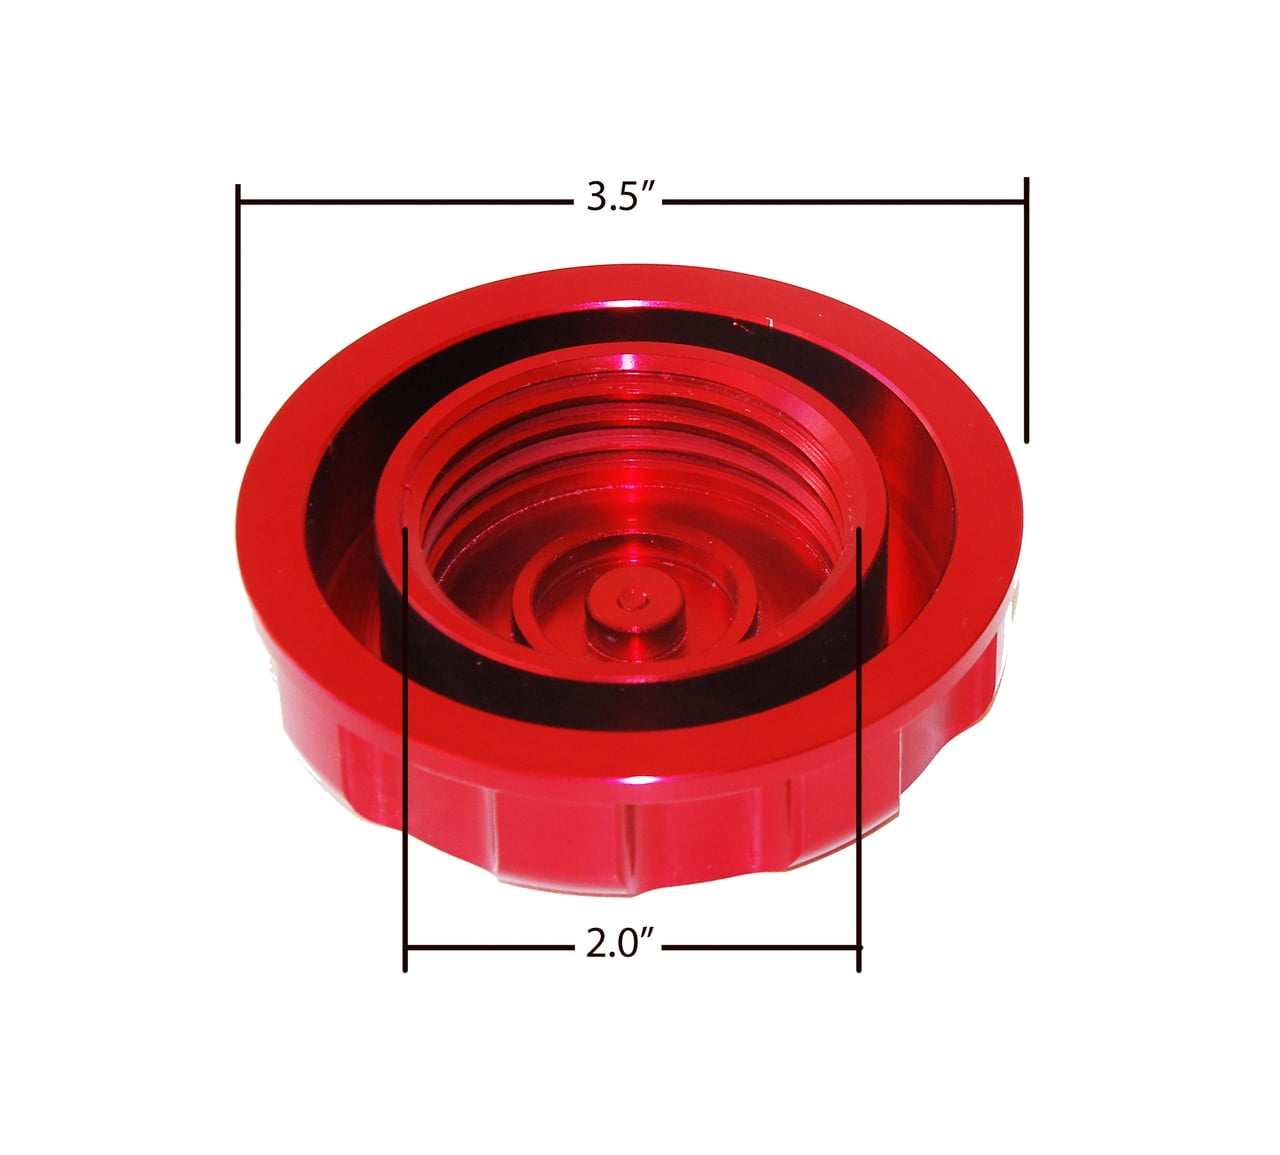 JS Billet Gas Cap Red with Rubber Gasket for Kawasaki Stand-Up Jet Ski. 